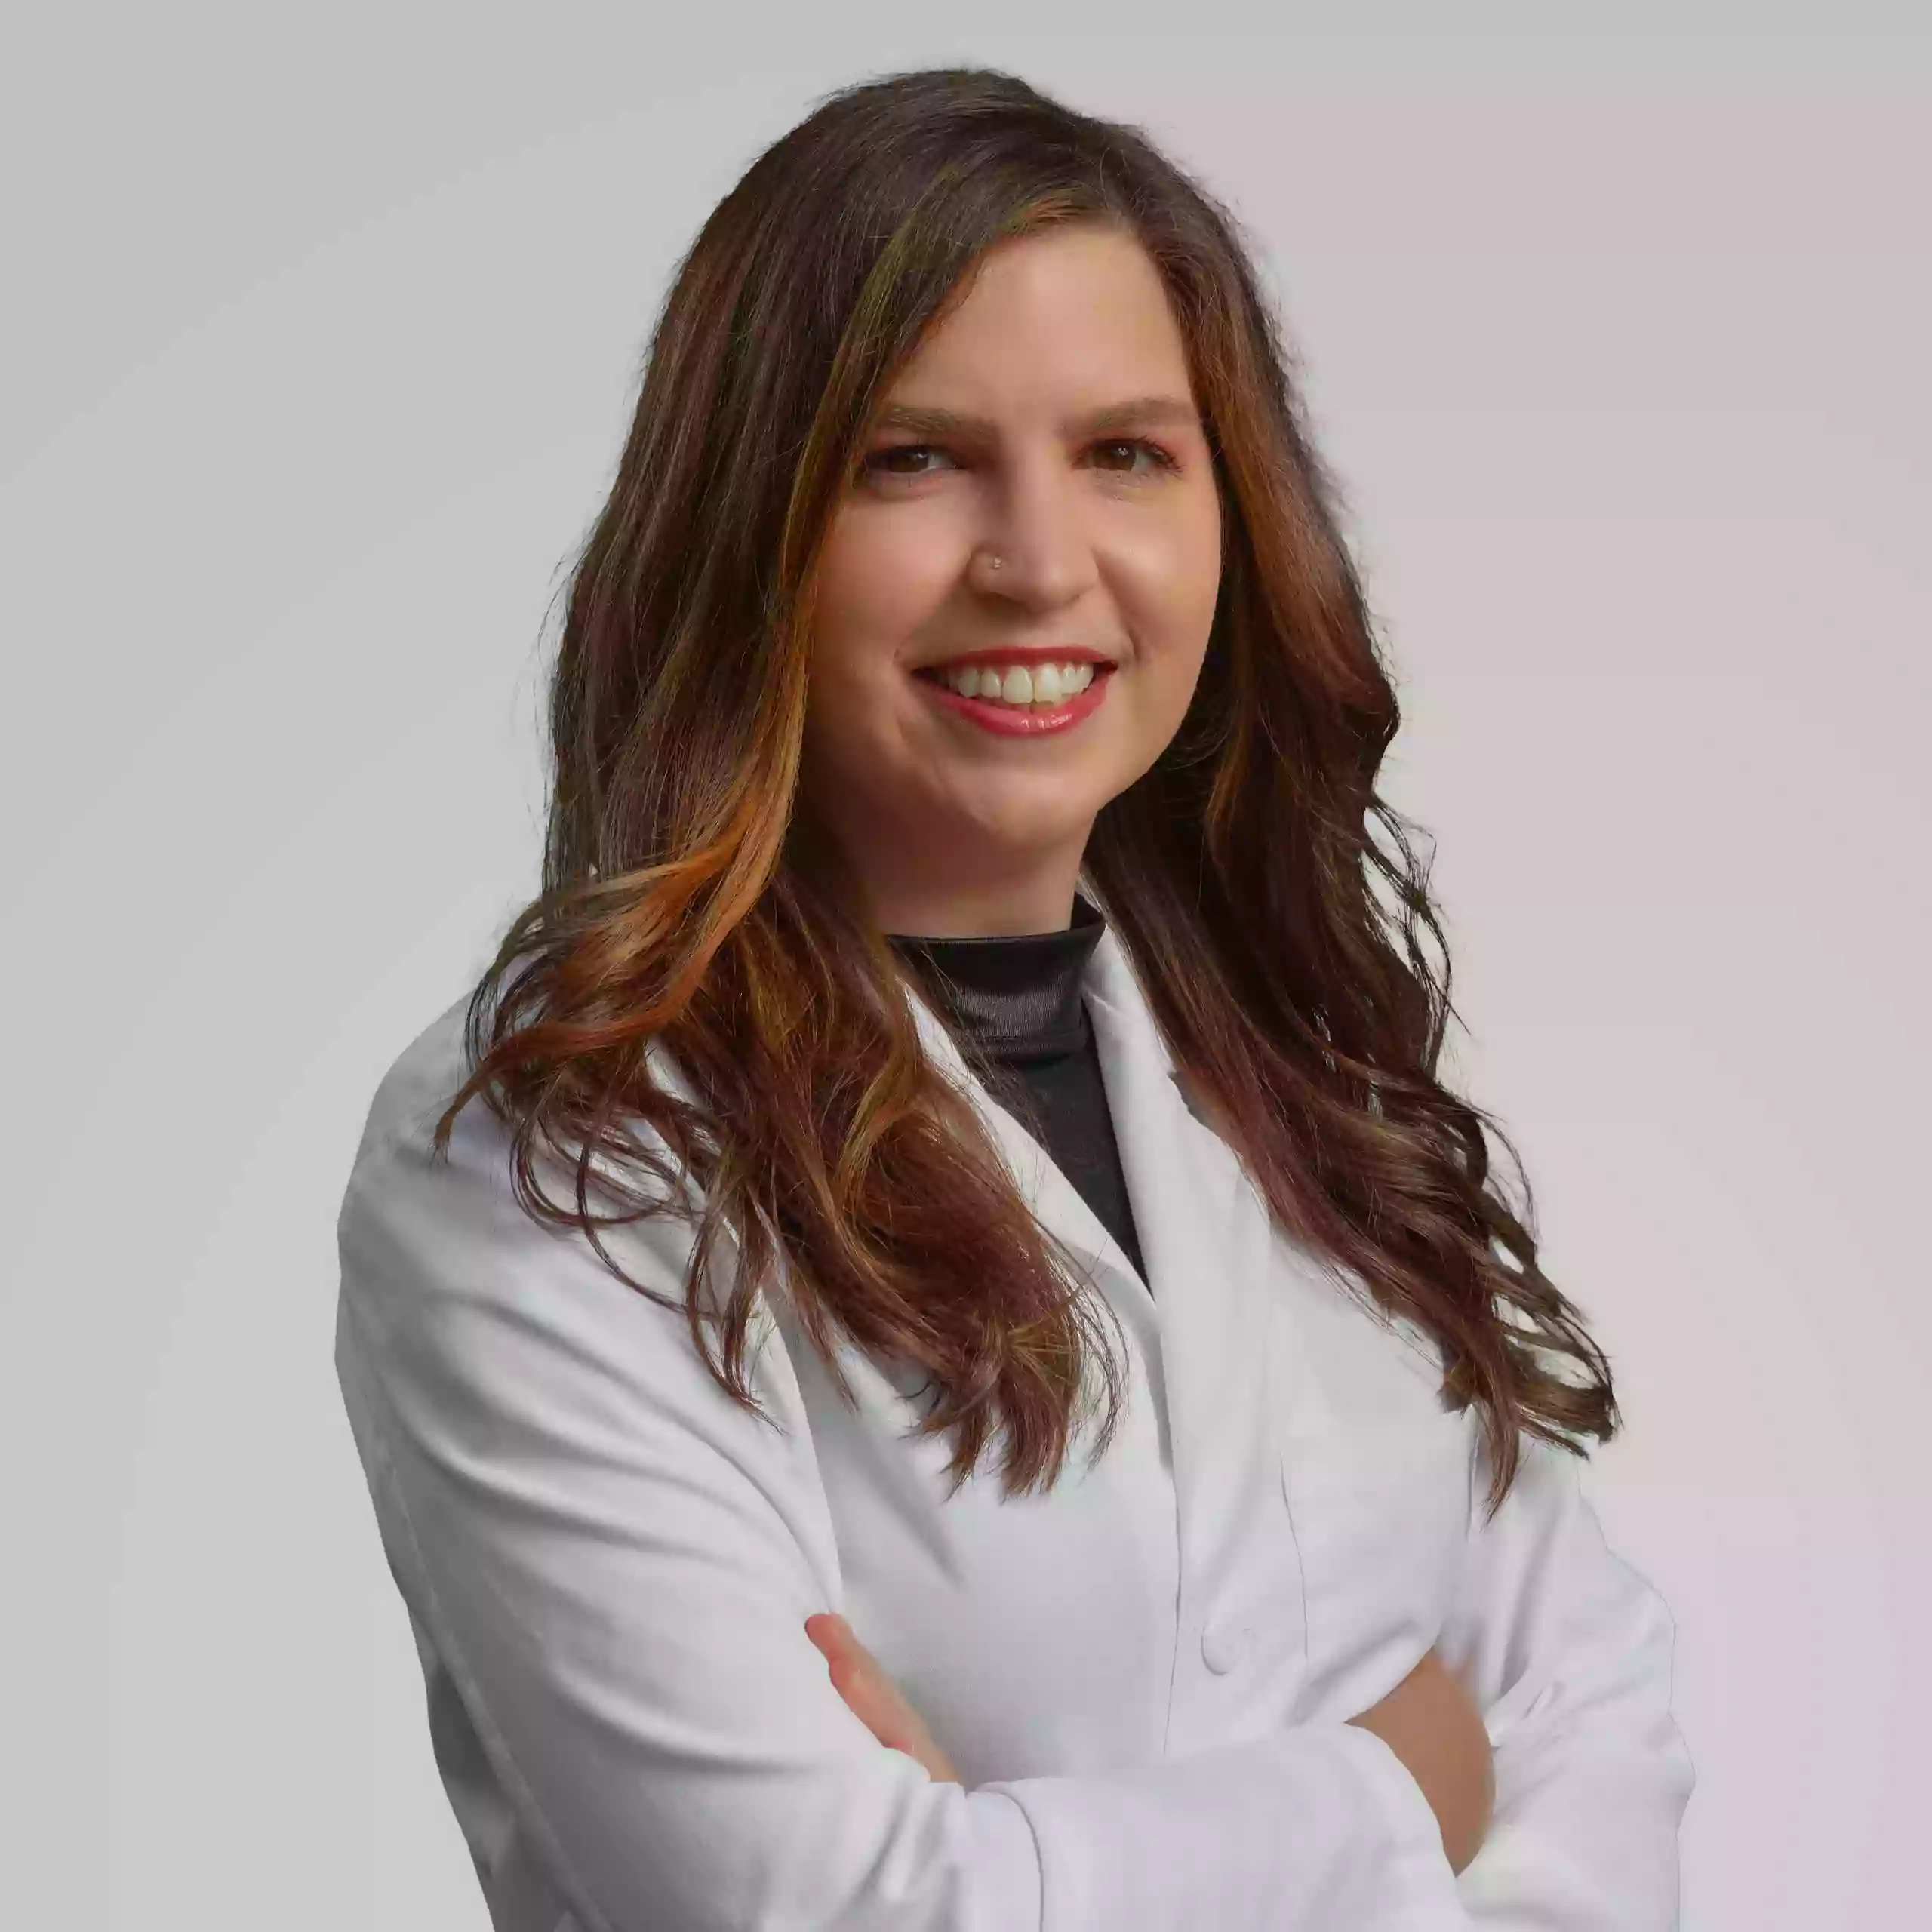 Starling Physicians: Dr. Anna Meola